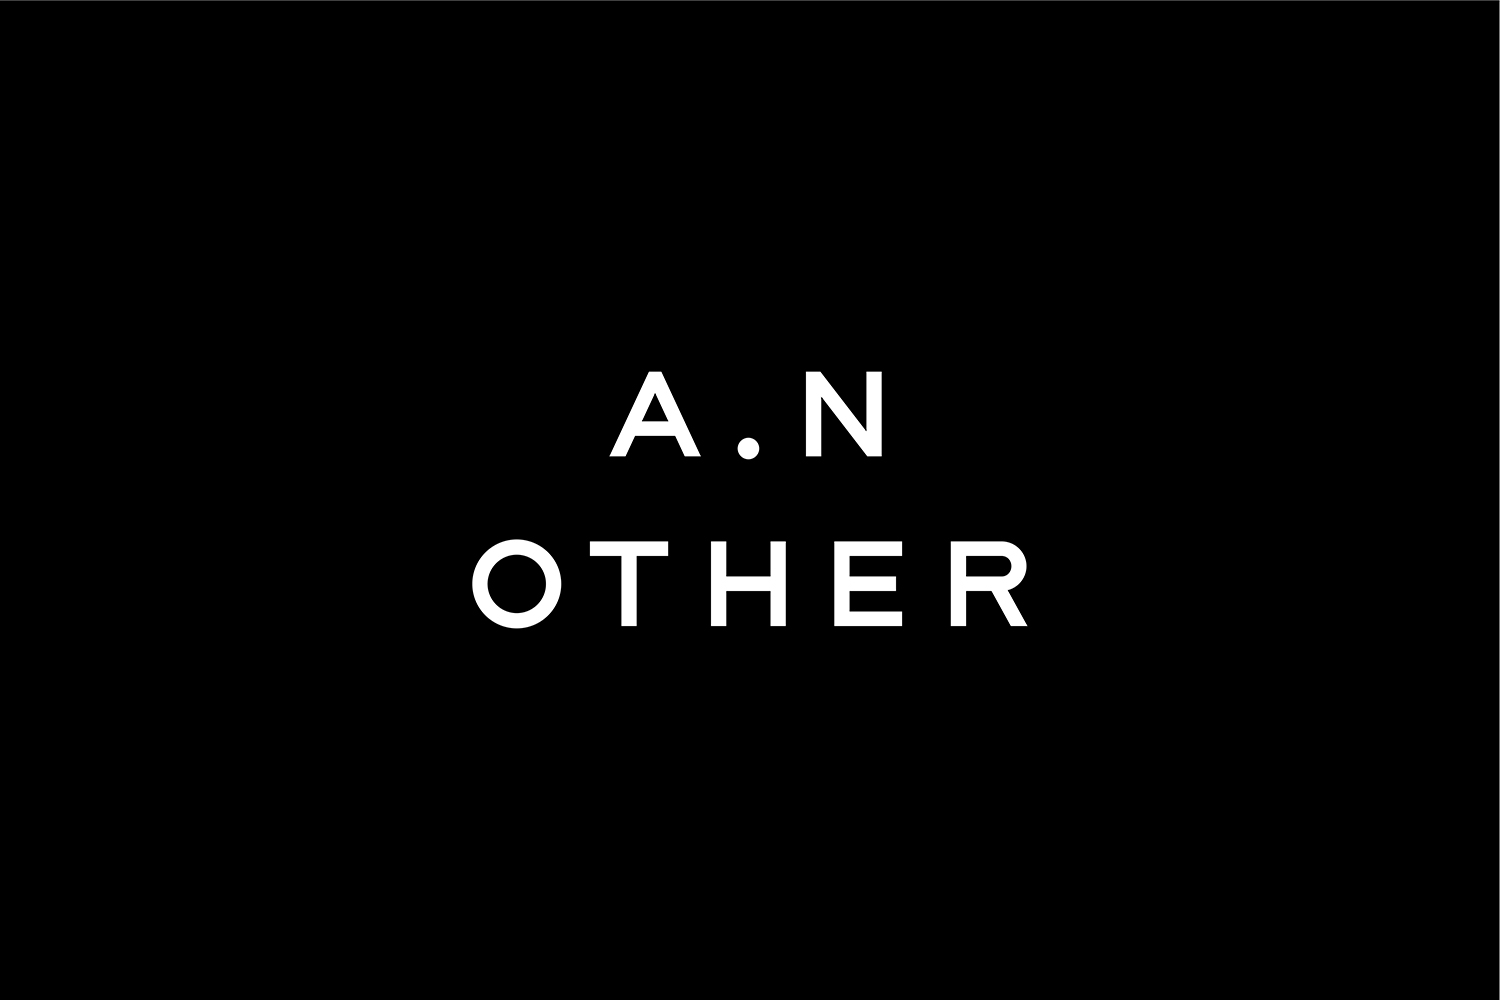 Creative Logotype Gallery & Inspiration: A.N Other by Socio Design, United Kingdom